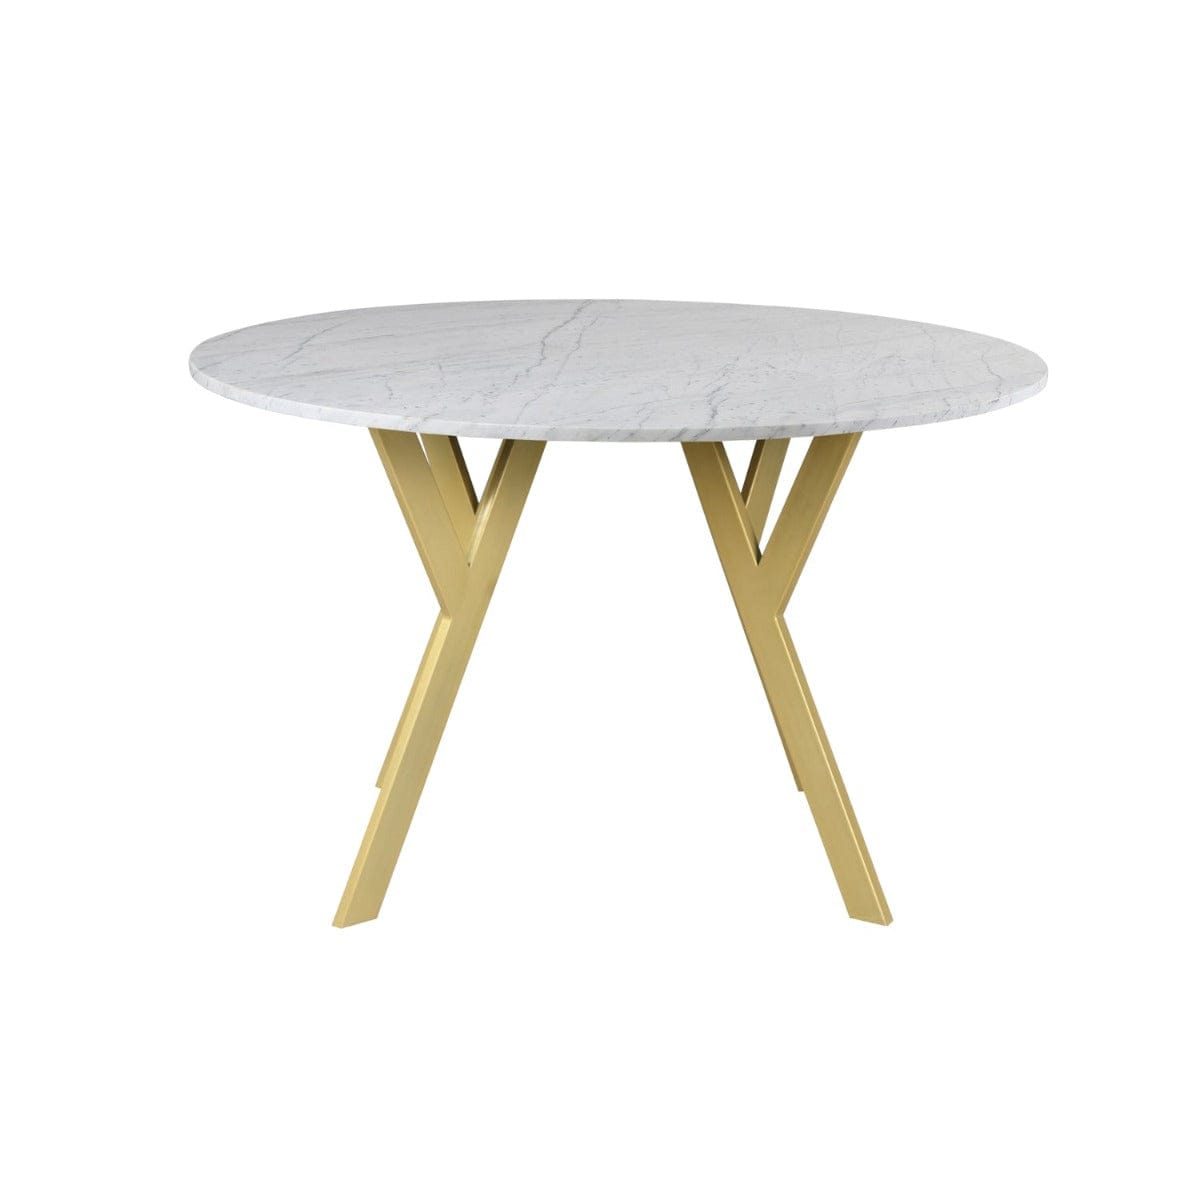 Kir 6 Seater Round Marble Dining Table Set In Gold Finish